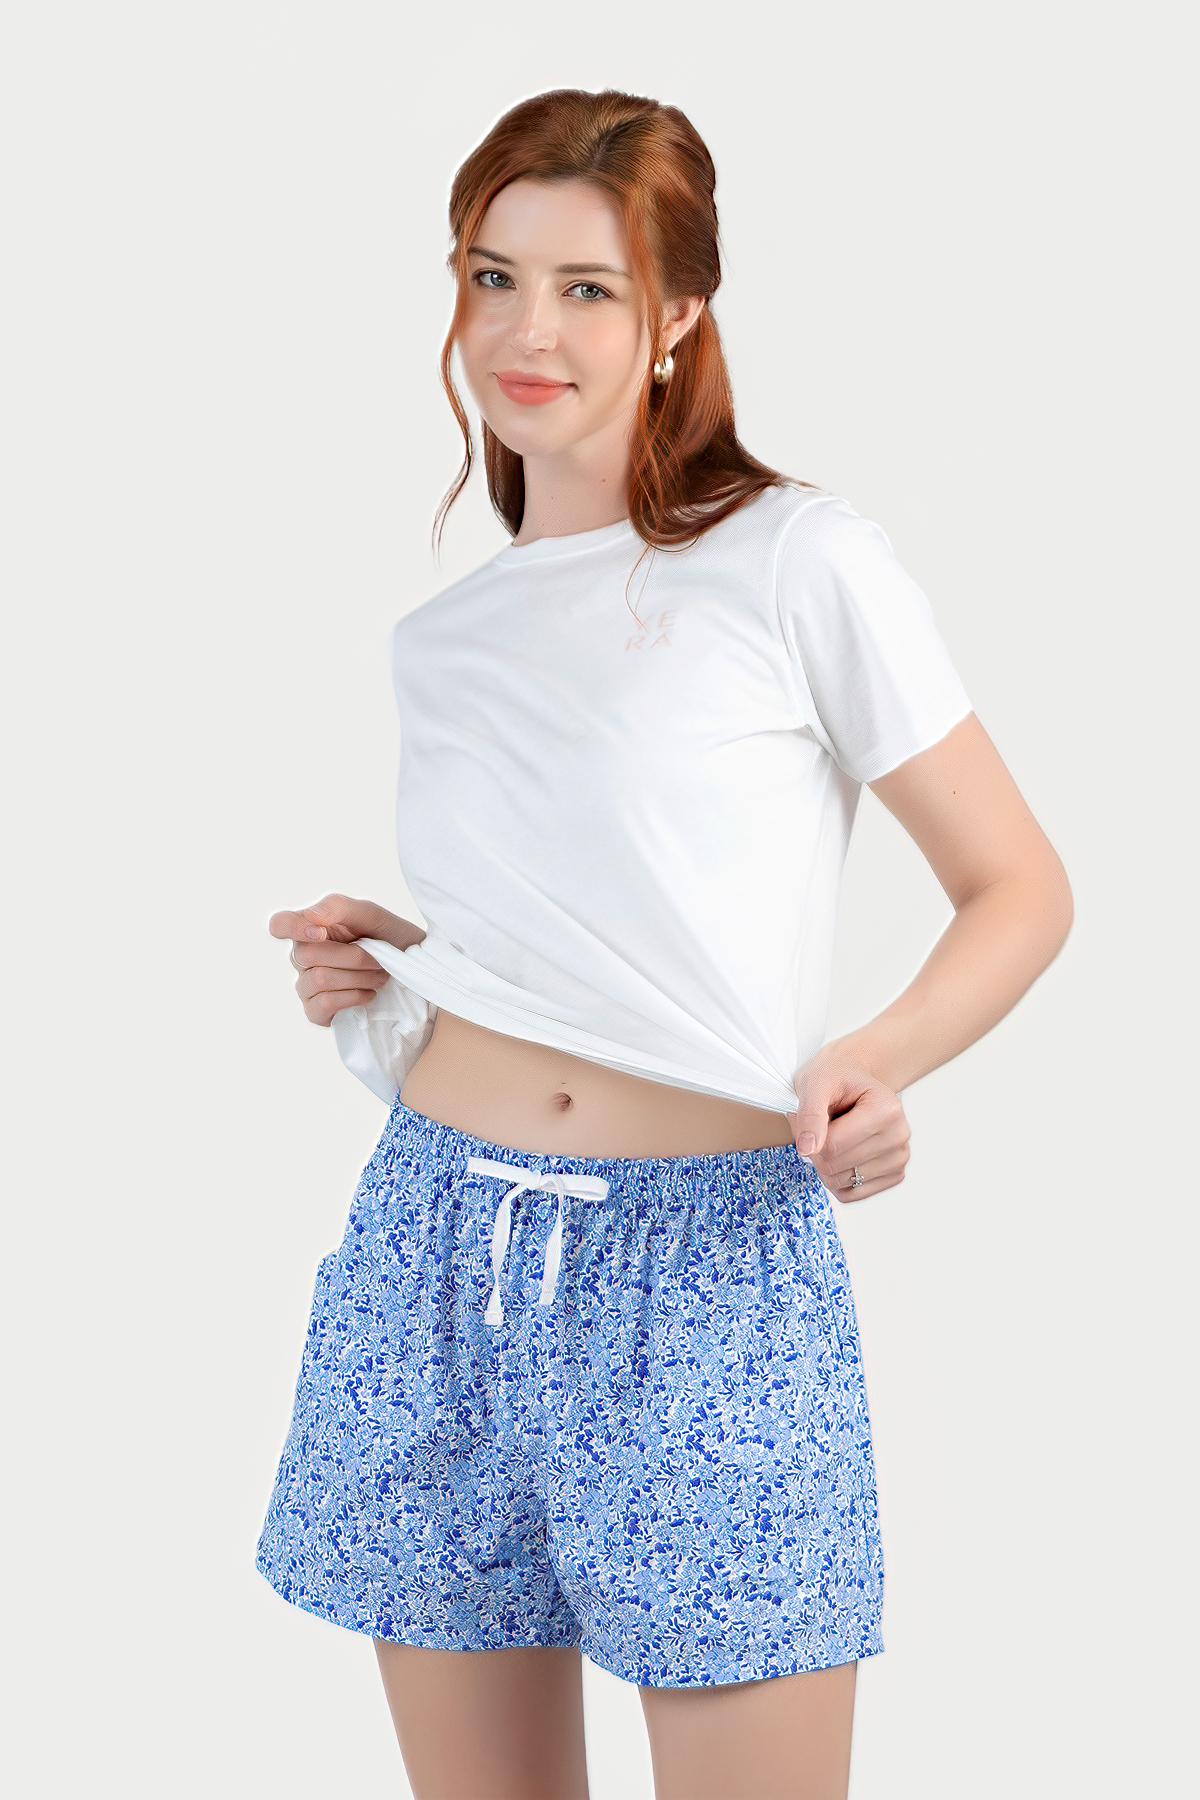 Quần ngủ short VERA kate cotton in - 9407